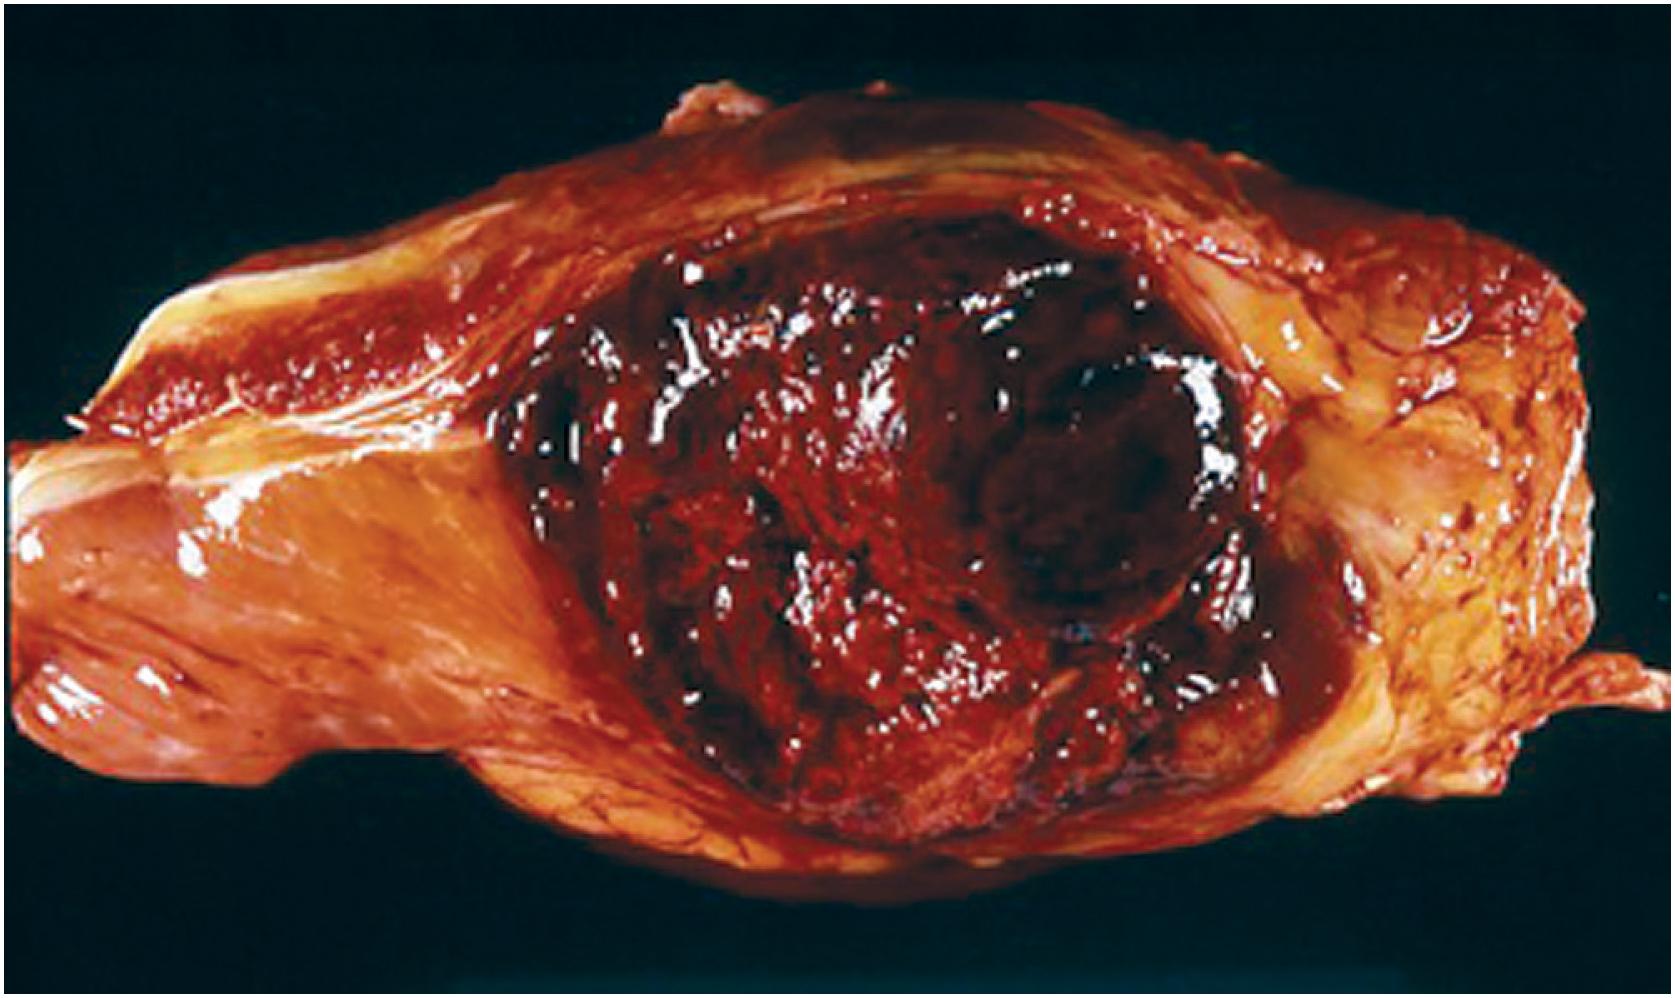 Fig. 12.6, Soft tissue osteosarcoma, presenting as a hemorrhagic and necrotic soft tissue mass without grossly apparent bone formation.